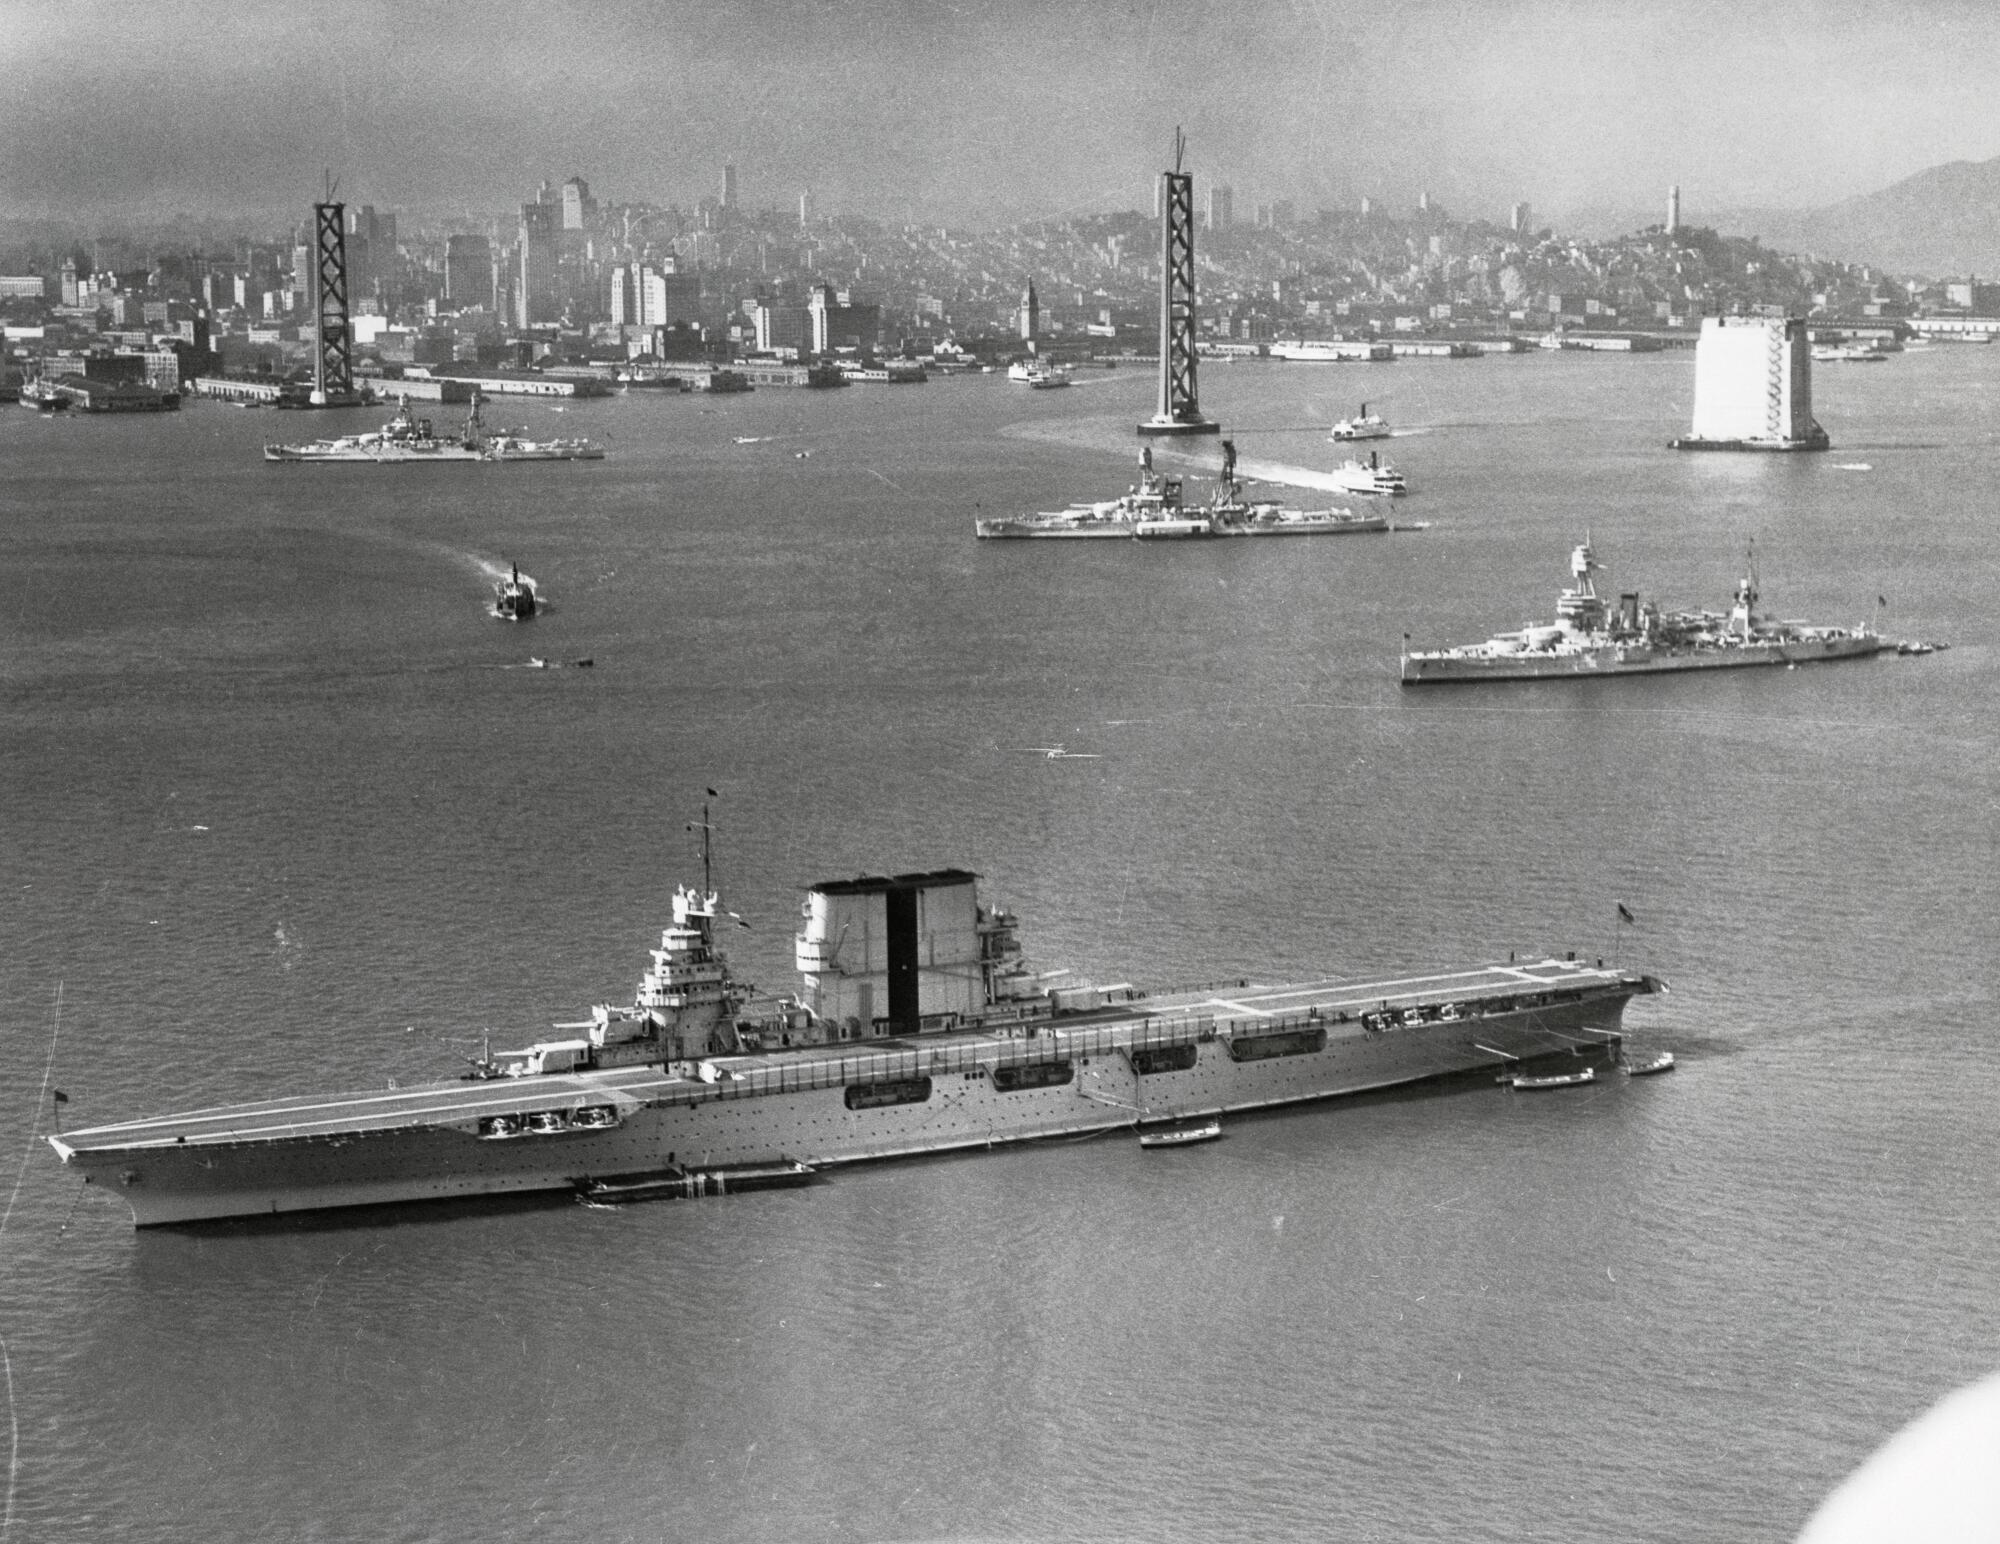 Black and white image shows military ships in San Francisco Bay